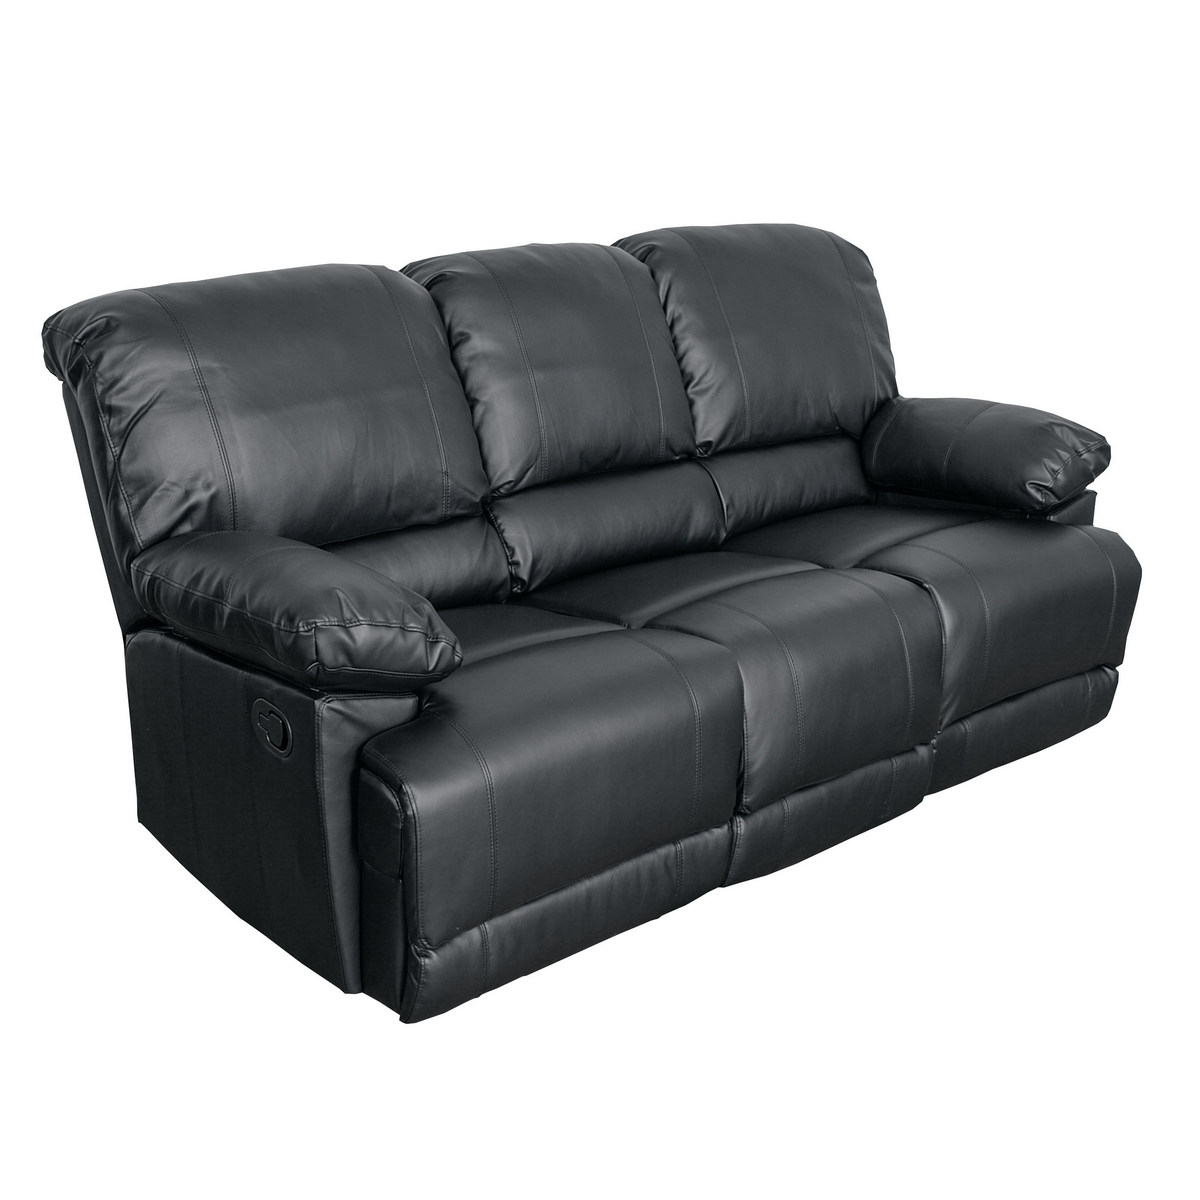 Corliving Lzy-301-s Lea Black Bonded Leather Reclining Sofa